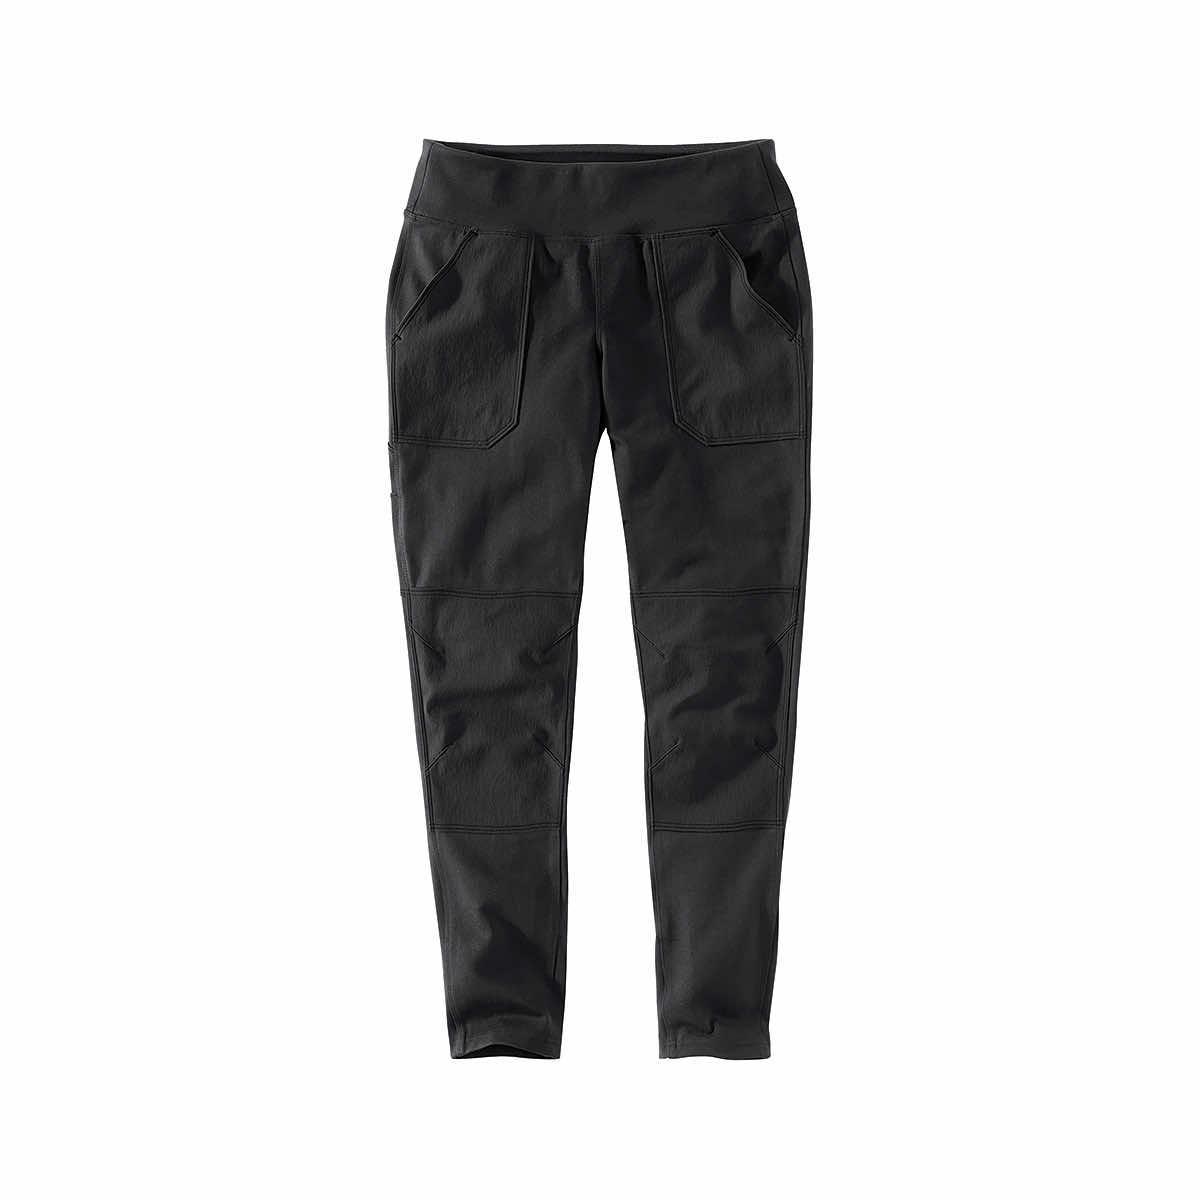 Women's Flame-Resistant Carhartt Force® Midweight Pocket Legging